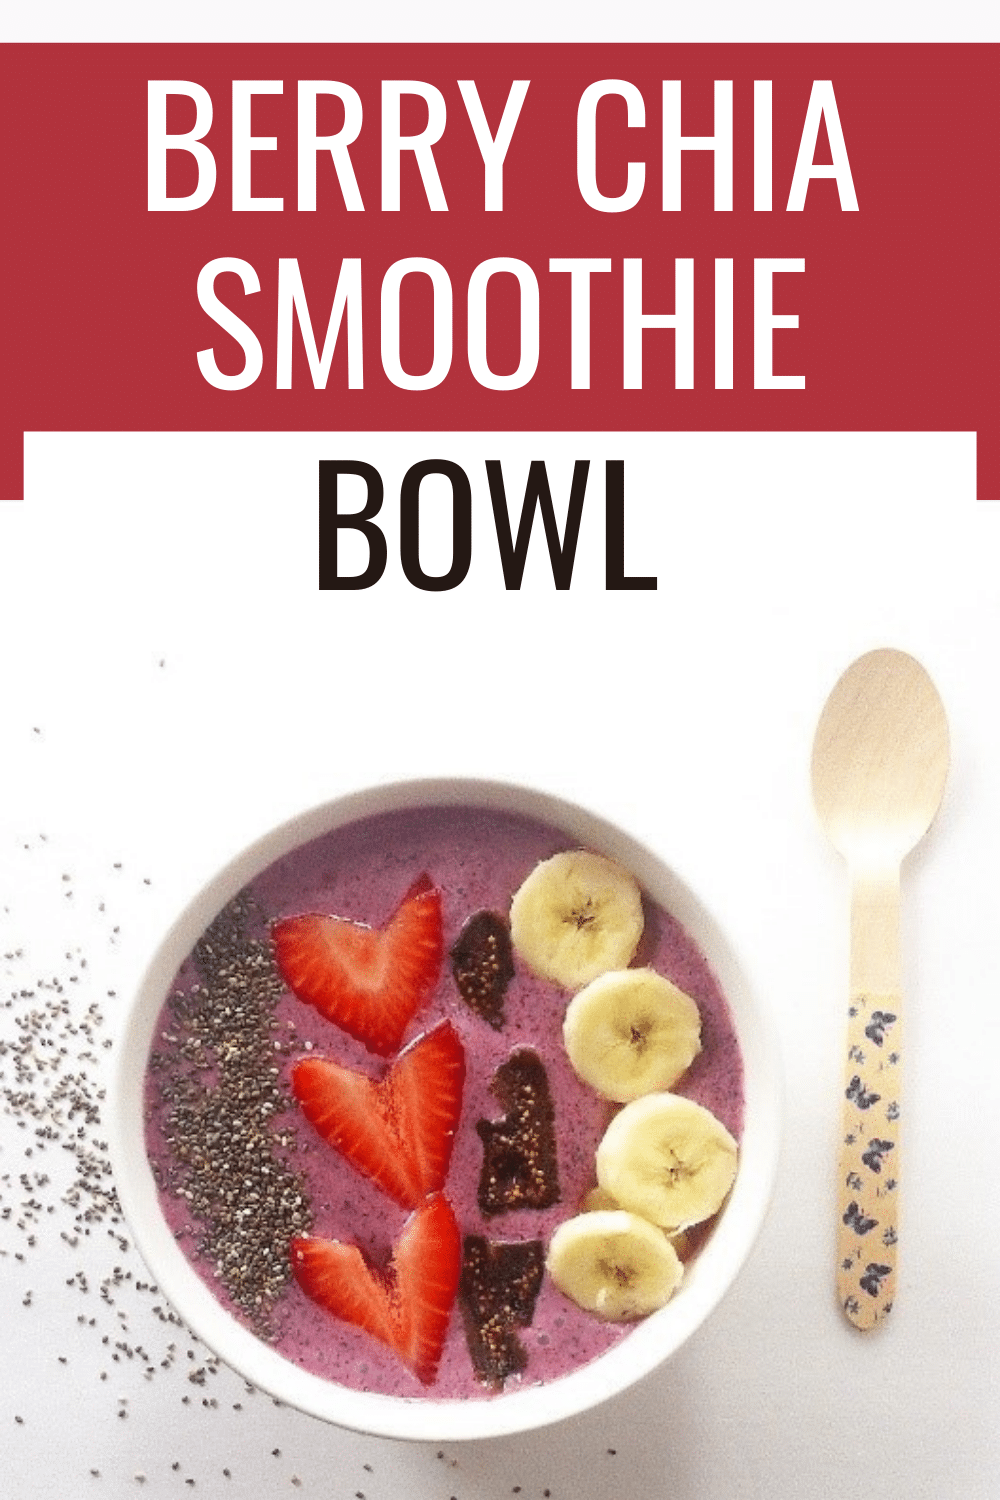 This Berry Chia Smoothie Bowl is a colorful and delicious way to start your day and it will keep you full and energized all morning! #smoothie #smoothiebowl #berry #chia via @wondermomwannab